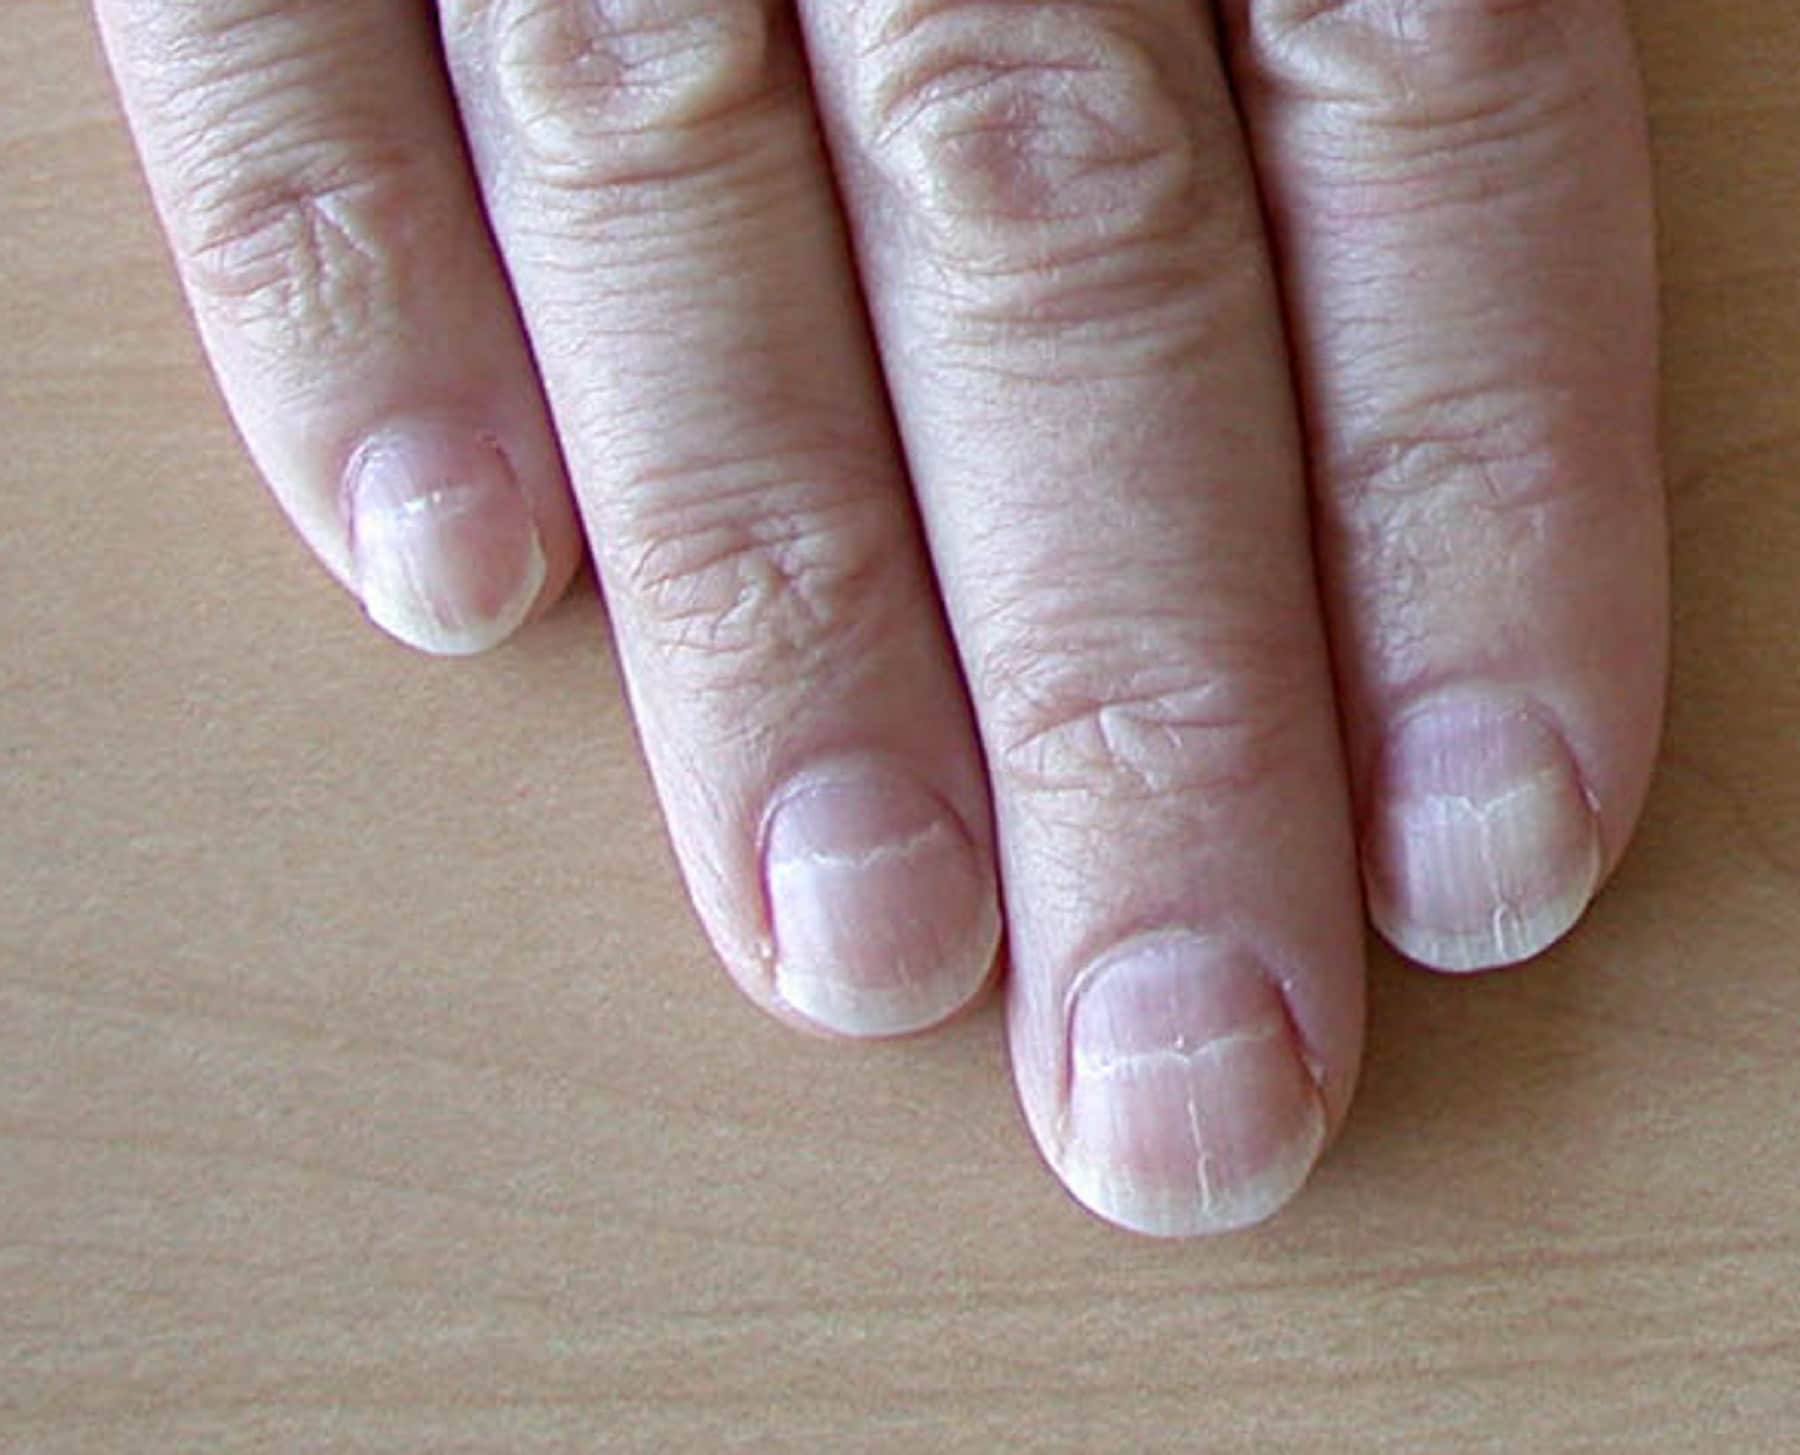 Do Nails That Crack & Split Down the Center Indicate ...